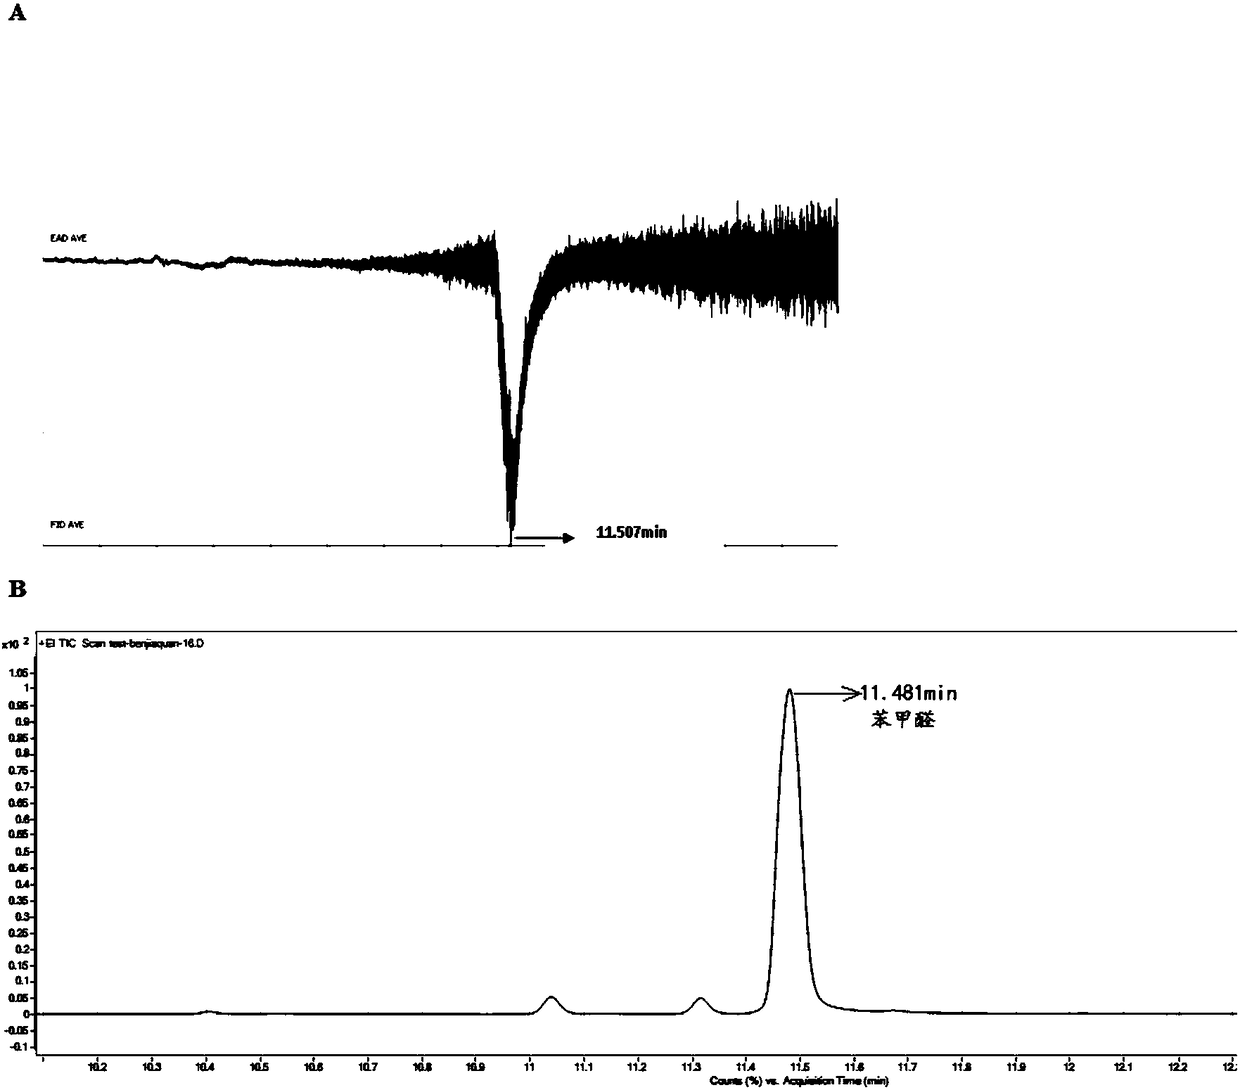 Method for analyzing insect semiochemicals by combining GC-MS and electroantennography